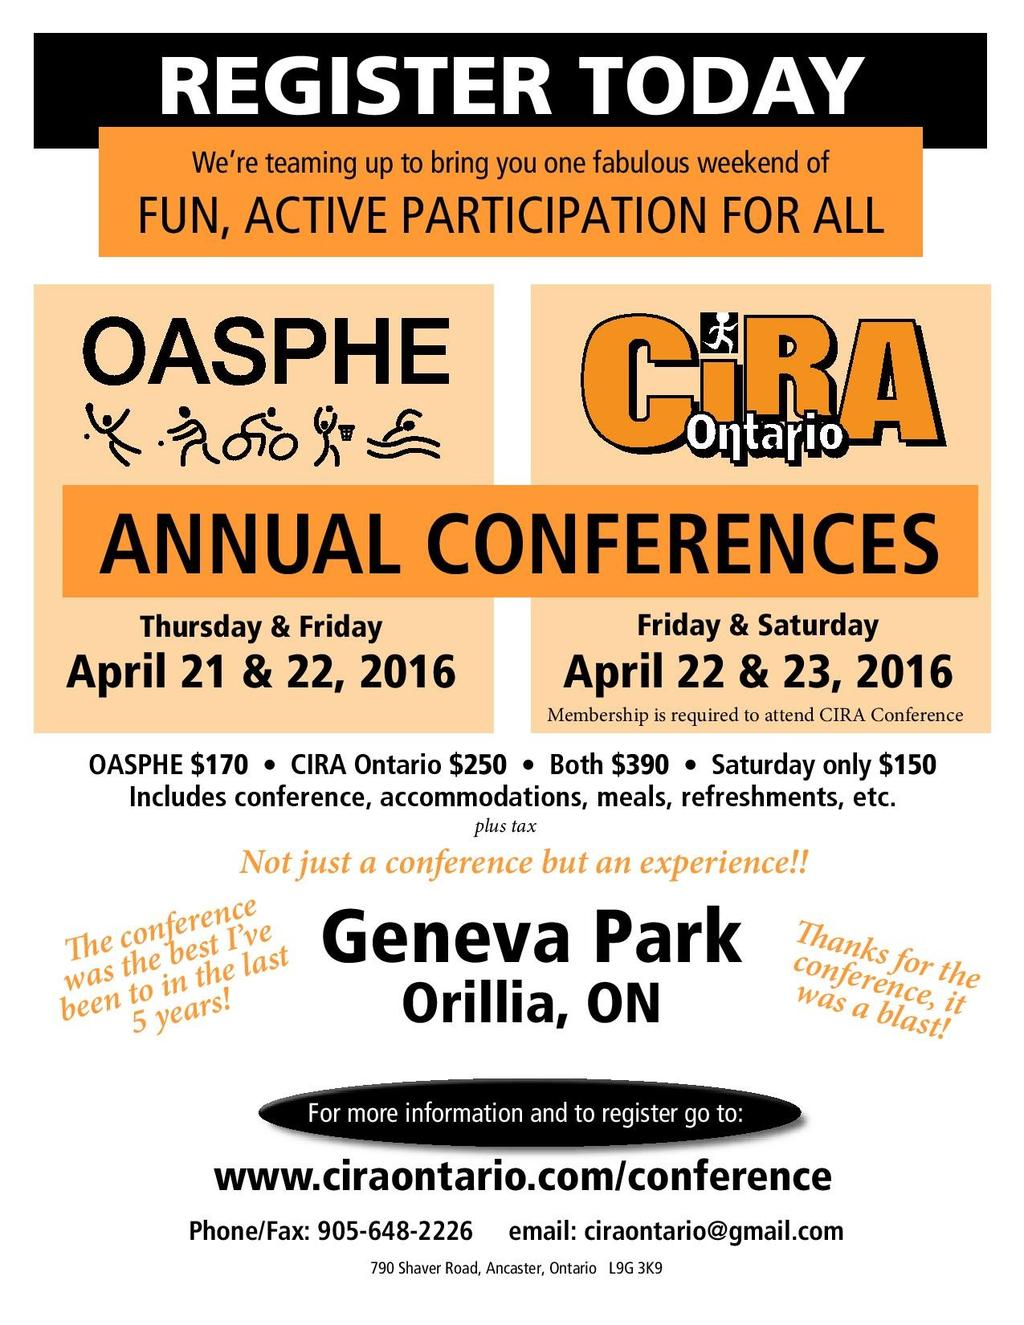 OASPHE/CIRA Ontario 2016 Conference Registration is open One of the first 5 to register for the CIRA conference wins 5